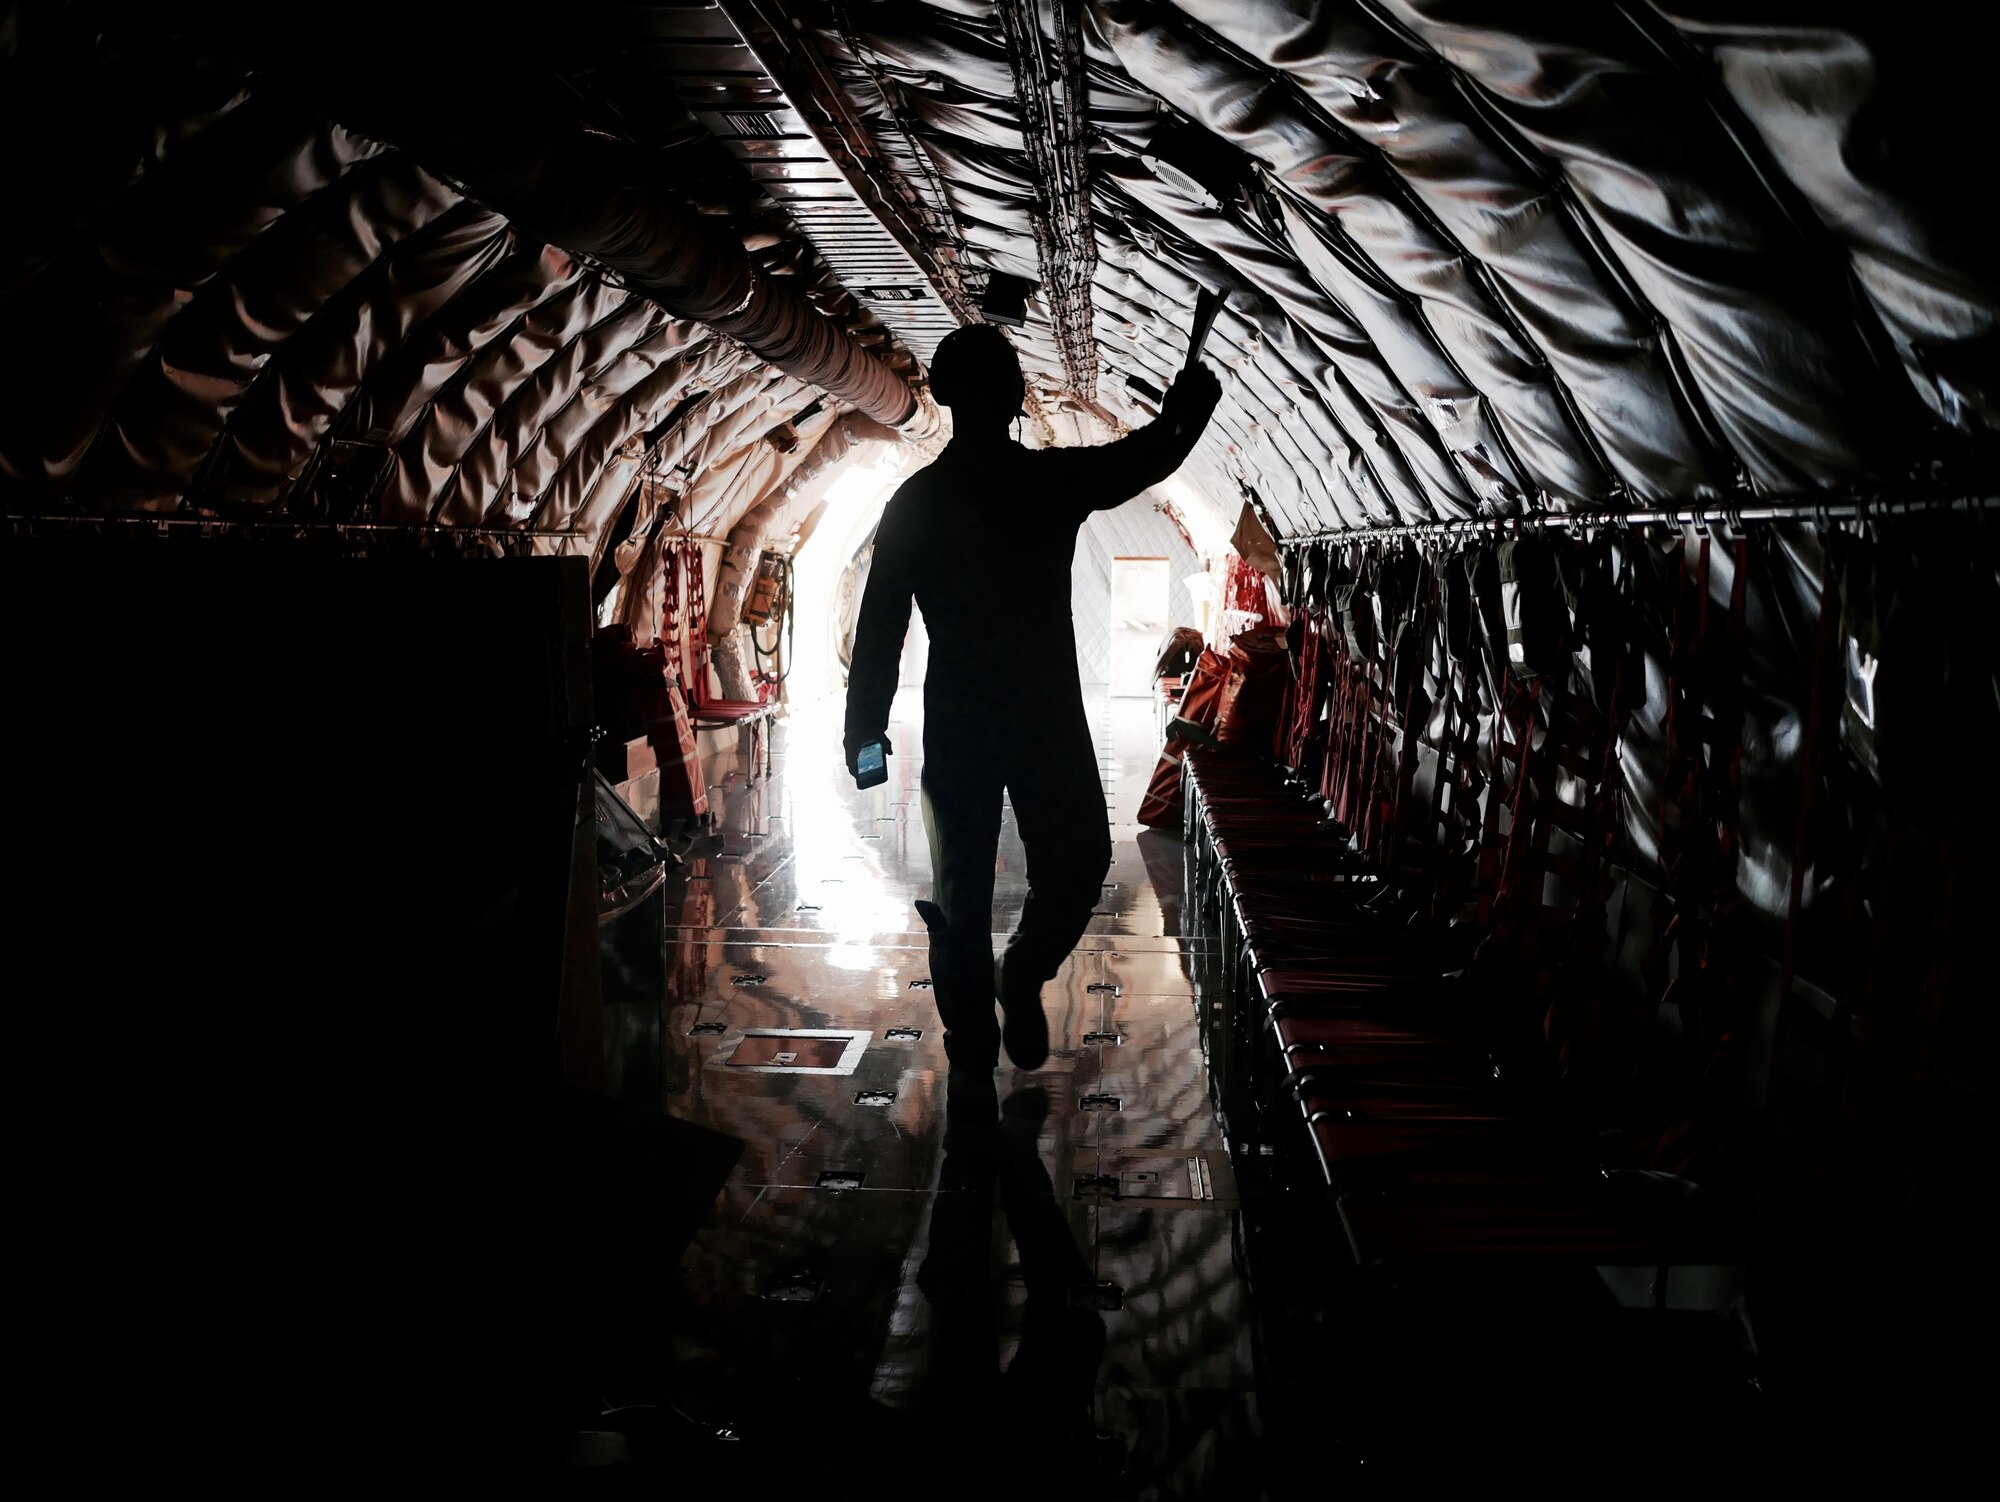 A U.S. Air Force boom operator for the 909th Air Refueling Squadron inspects the fuselage of a KC-135R Stratotanker June 21, 2016, at Kadena Air Base Japan. While pilots are responsible for flying the aircraft and handling the majority of operations in the cockpit, boom operators look after the rest of the aircraft while in flight. (U.S Air Force photo by Senior Airman John Linzmeier)